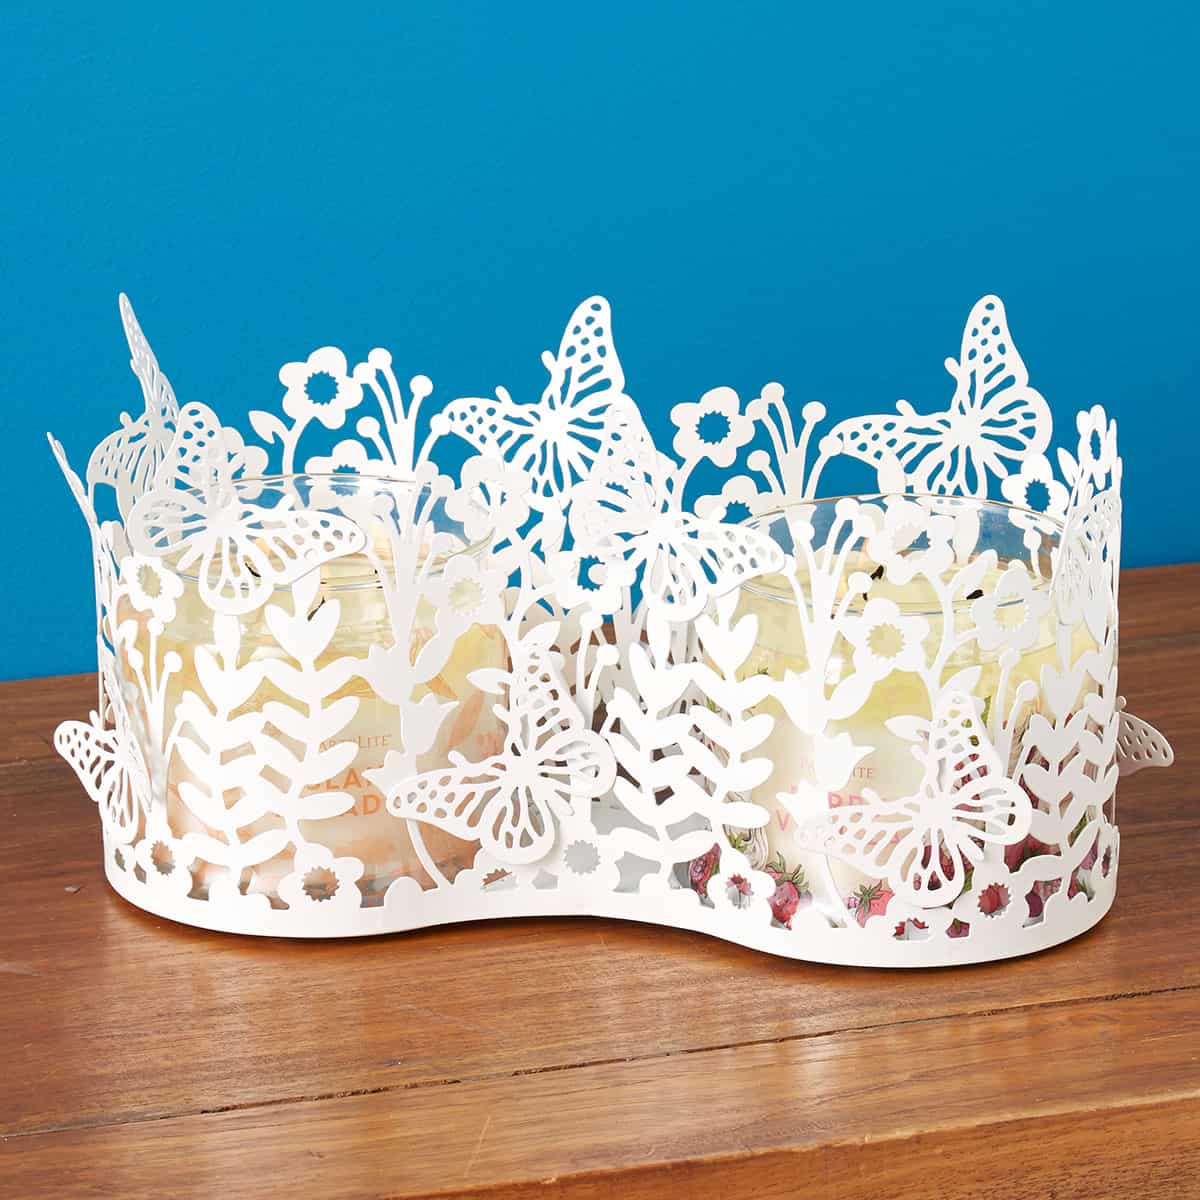 Chasing Butterflies Double Jar Candle Holder - PartyLite US